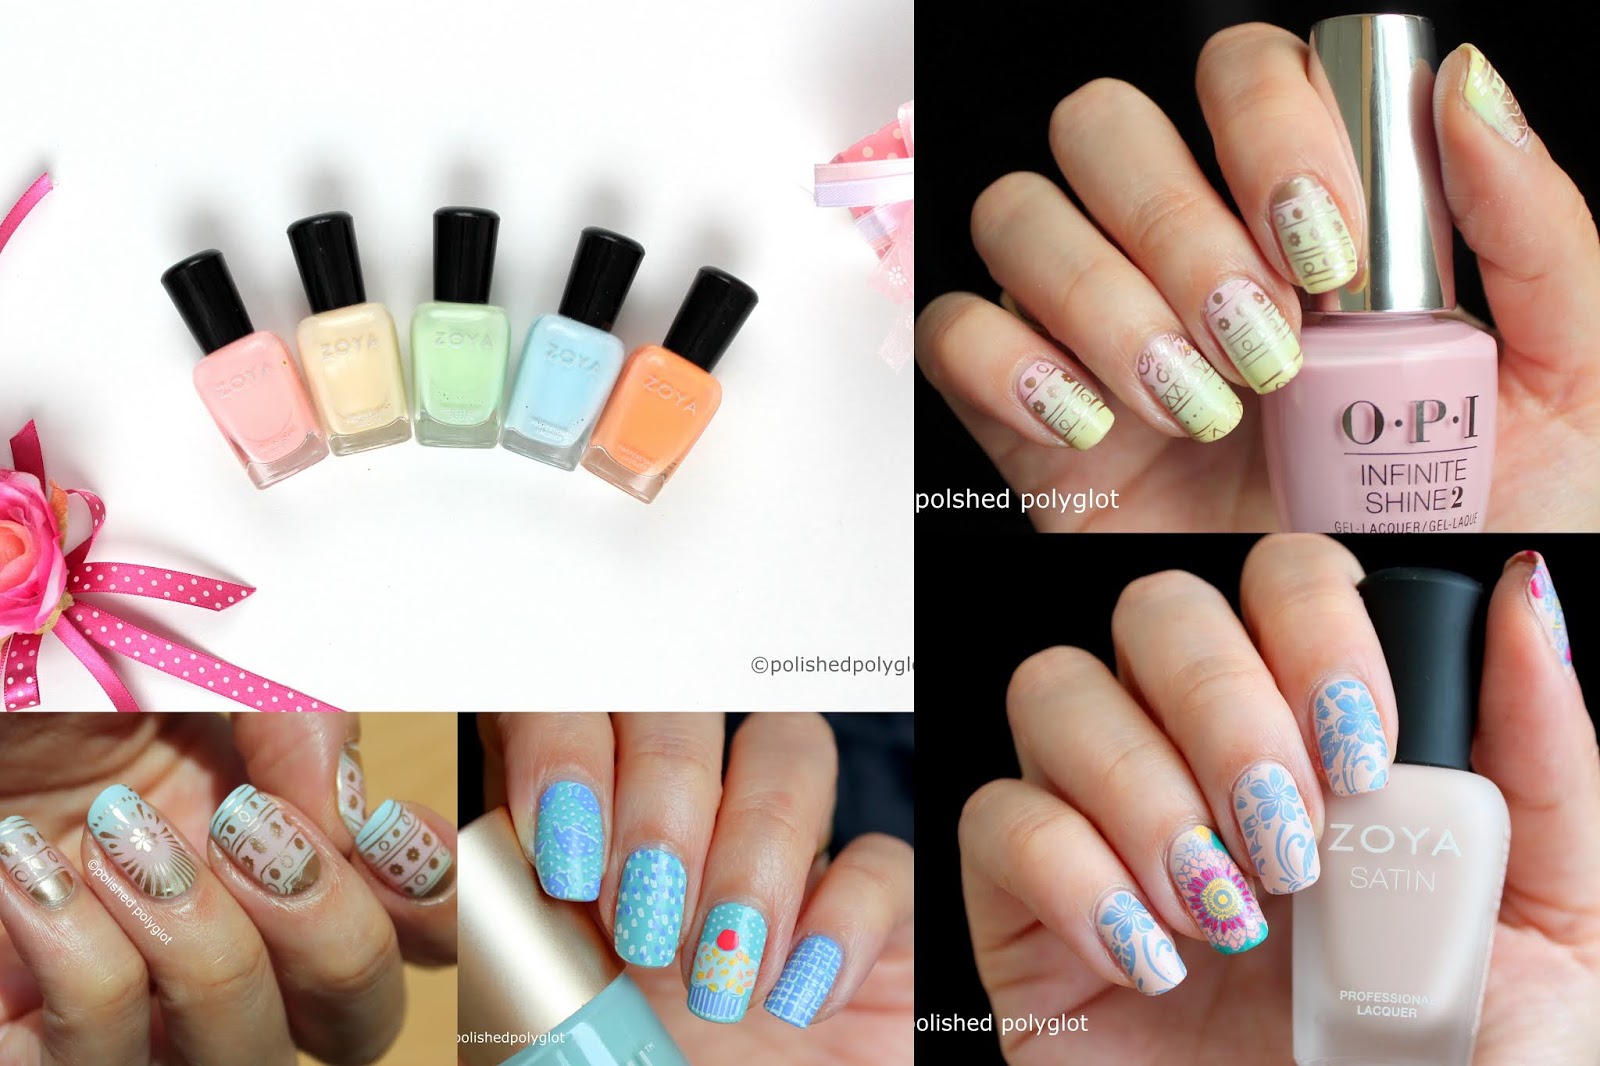 2. "10 Adorable Pastel Nail Colors to Try" - wide 8